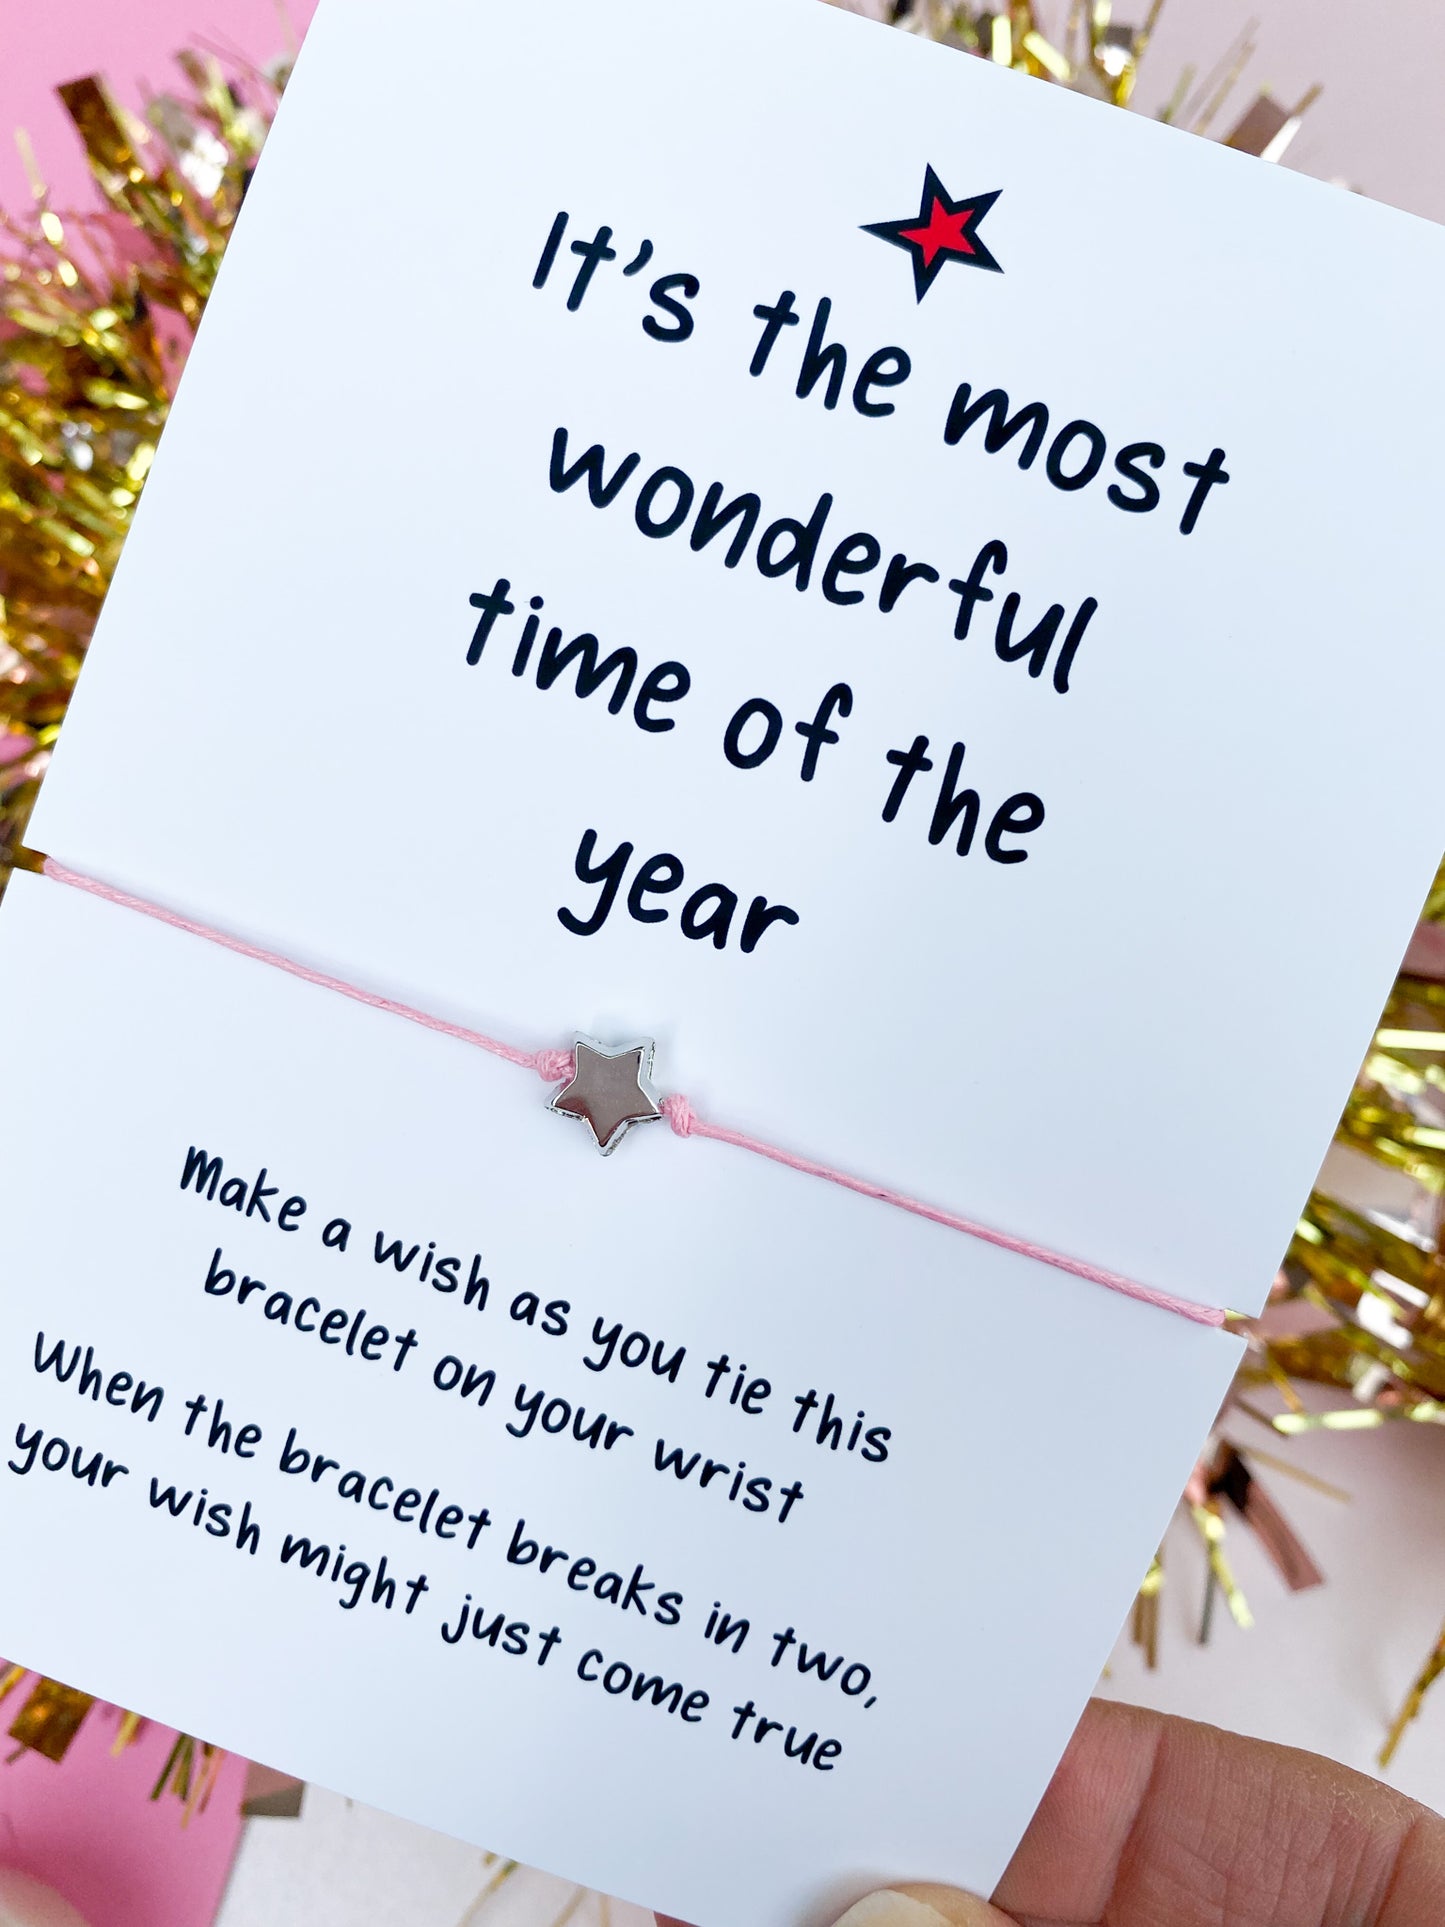 It's the most wonderful time | Merry Christmas Wish Bracelet